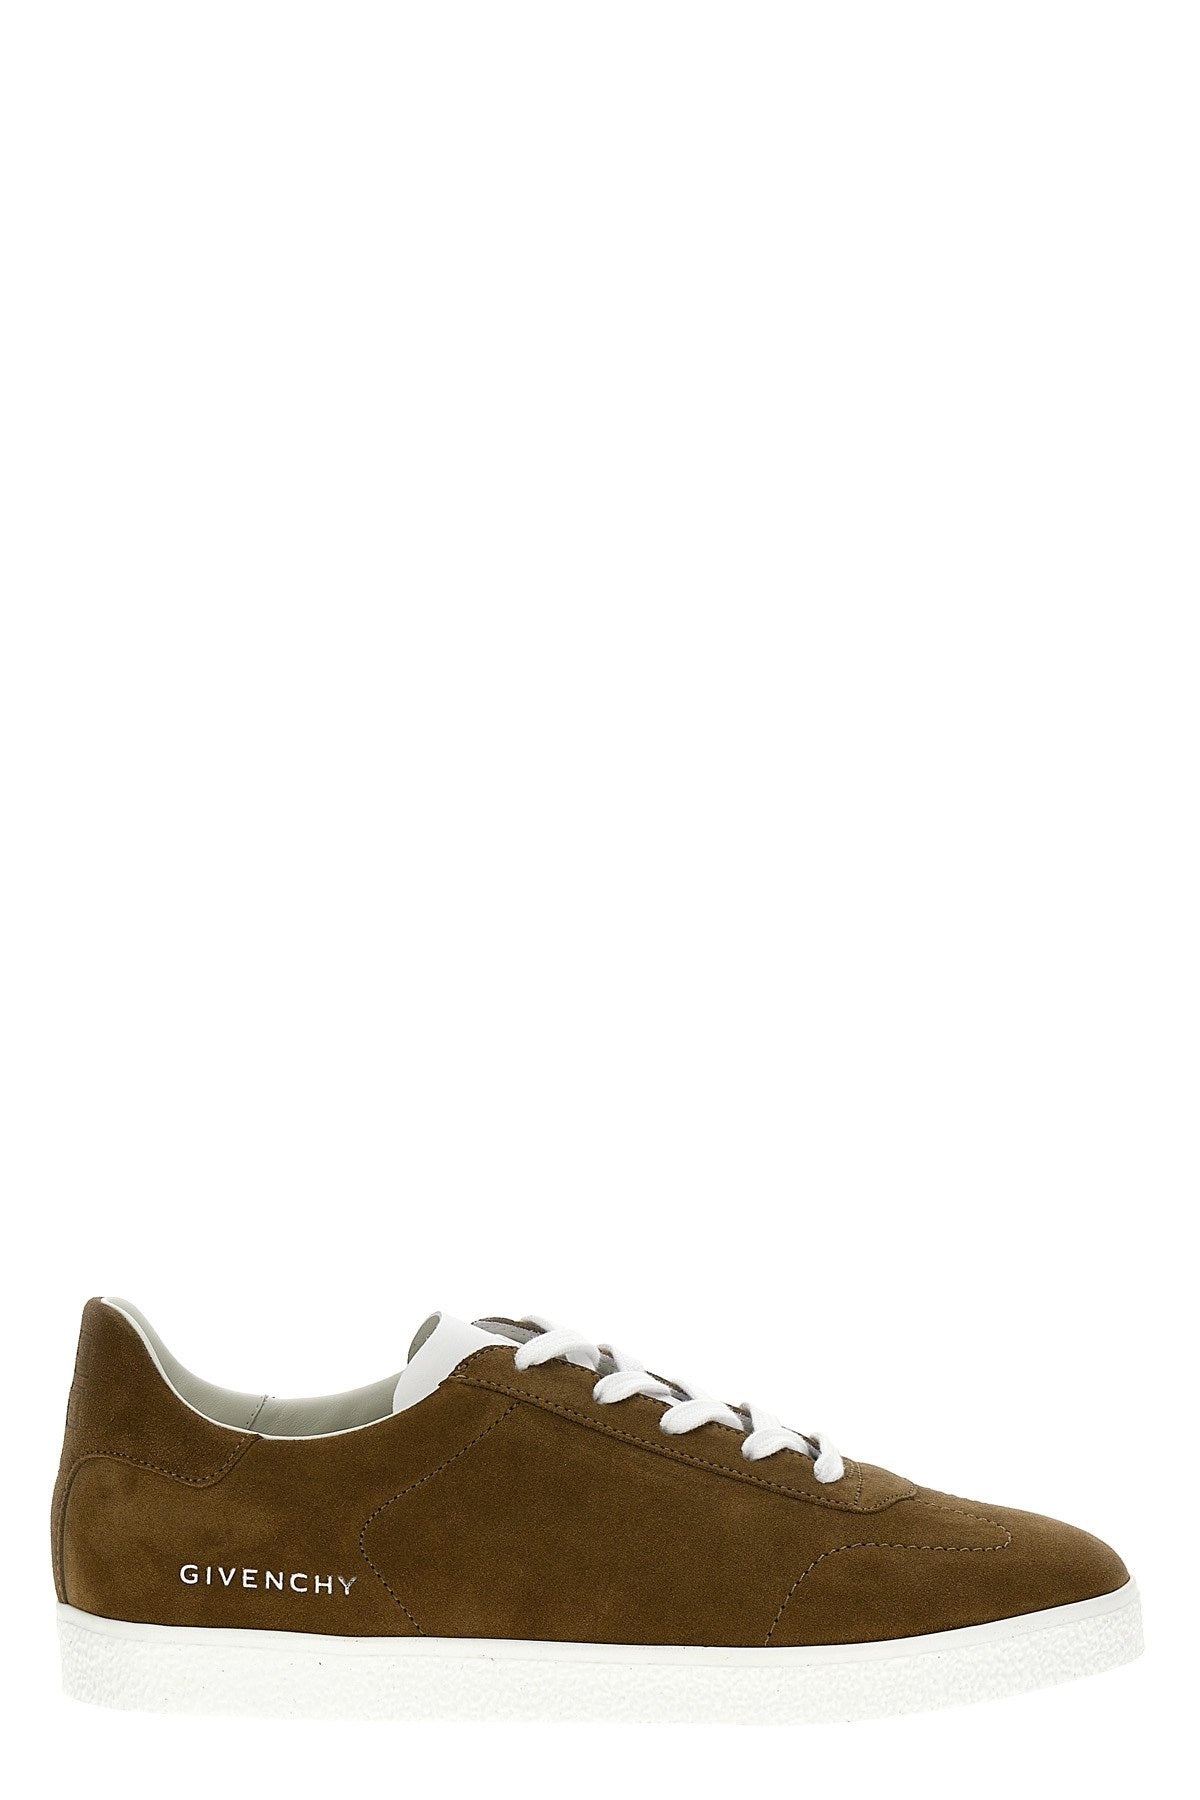 Givenchy Men 'Town' Sneakers - 1